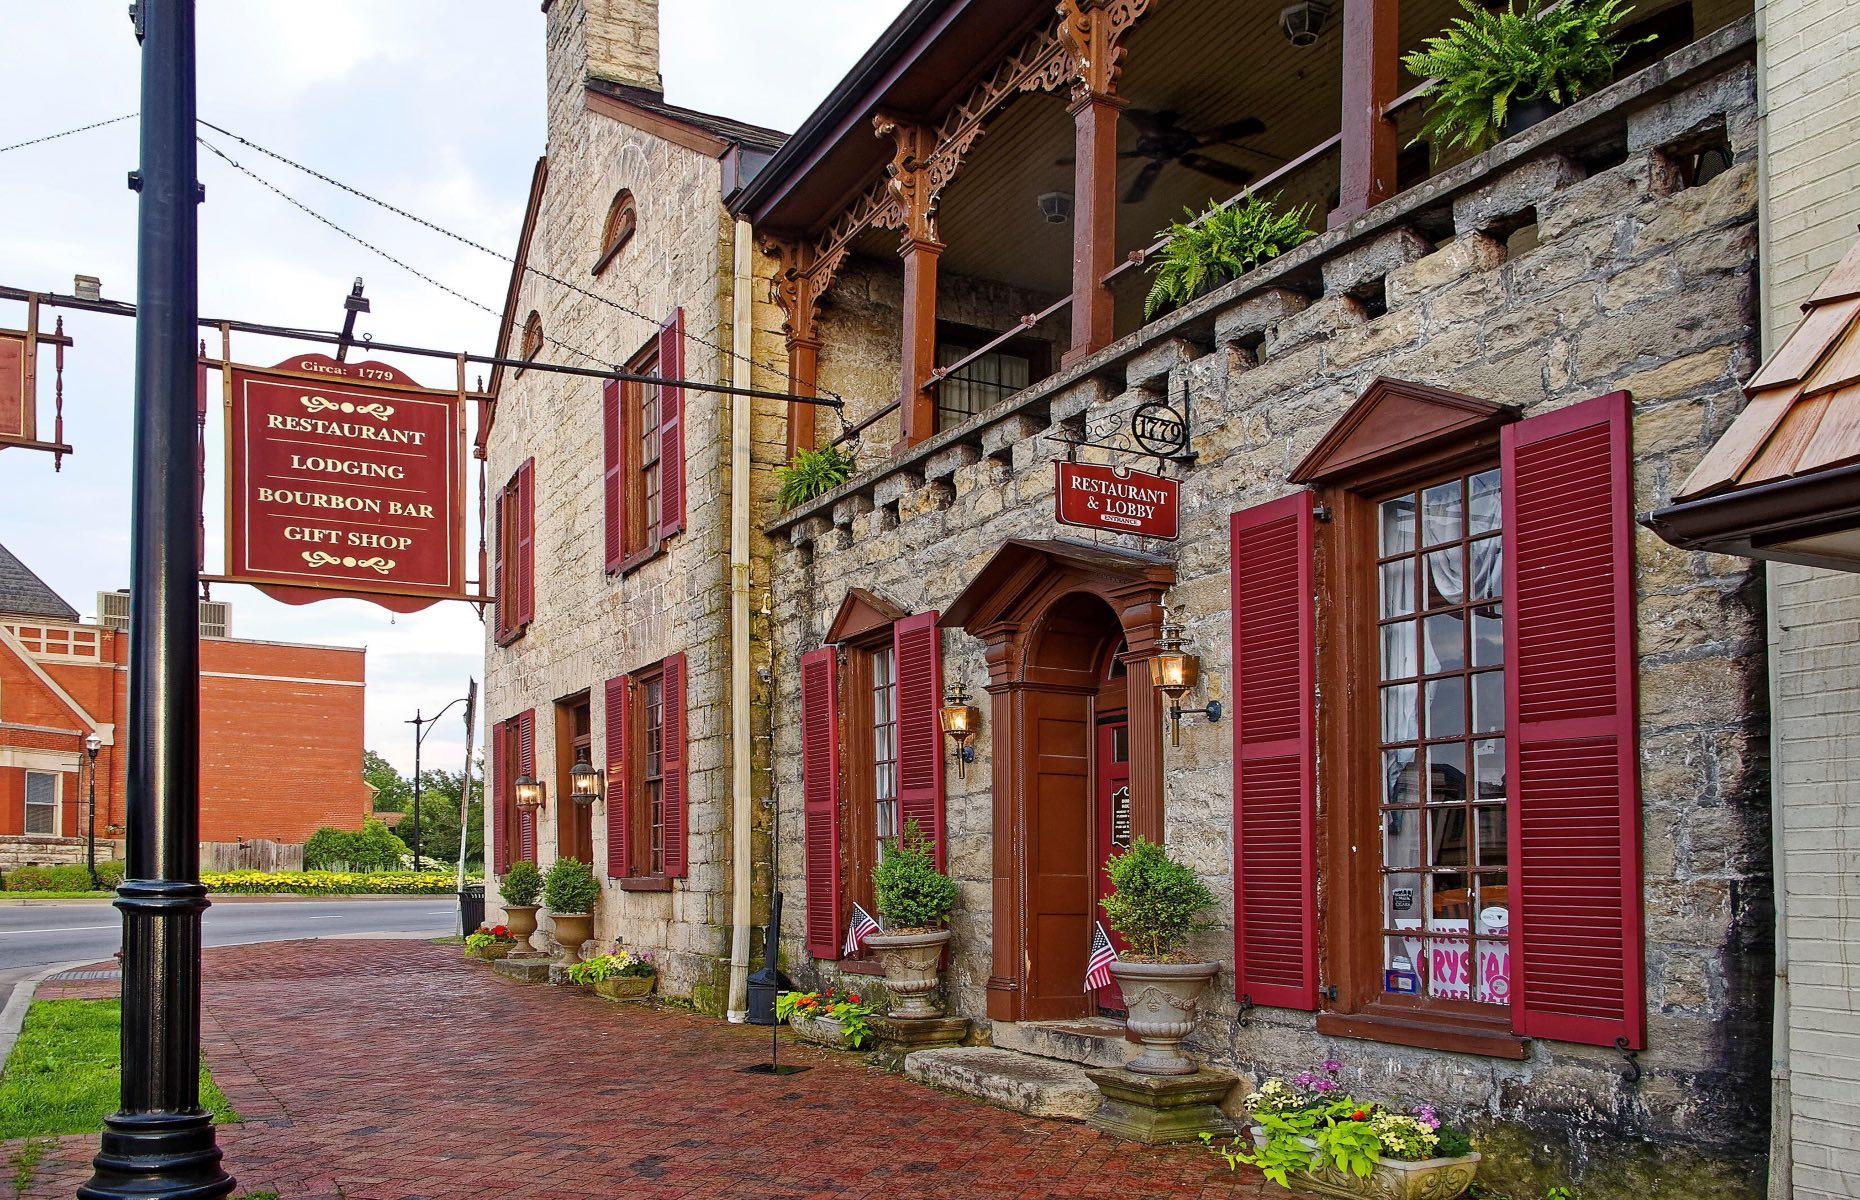 <p>As Kentucky’s second oldest city dating back to 1780, Bardstown is brimful of historic charm and is a must-visit on any trip to the state. It boasts 200 buildings on the US National Register of Historic Places including the quaint Old Talbott Tavern (pictured).</p>  <p>As the self-styled Bourbon Capital of the World, it sits at the beginning of the official Kentucky Bourbon Trail so it’s a great place to sample the famous amber nectar, with 11 craft distilleries dotted within 16 miles of downtown.</p>